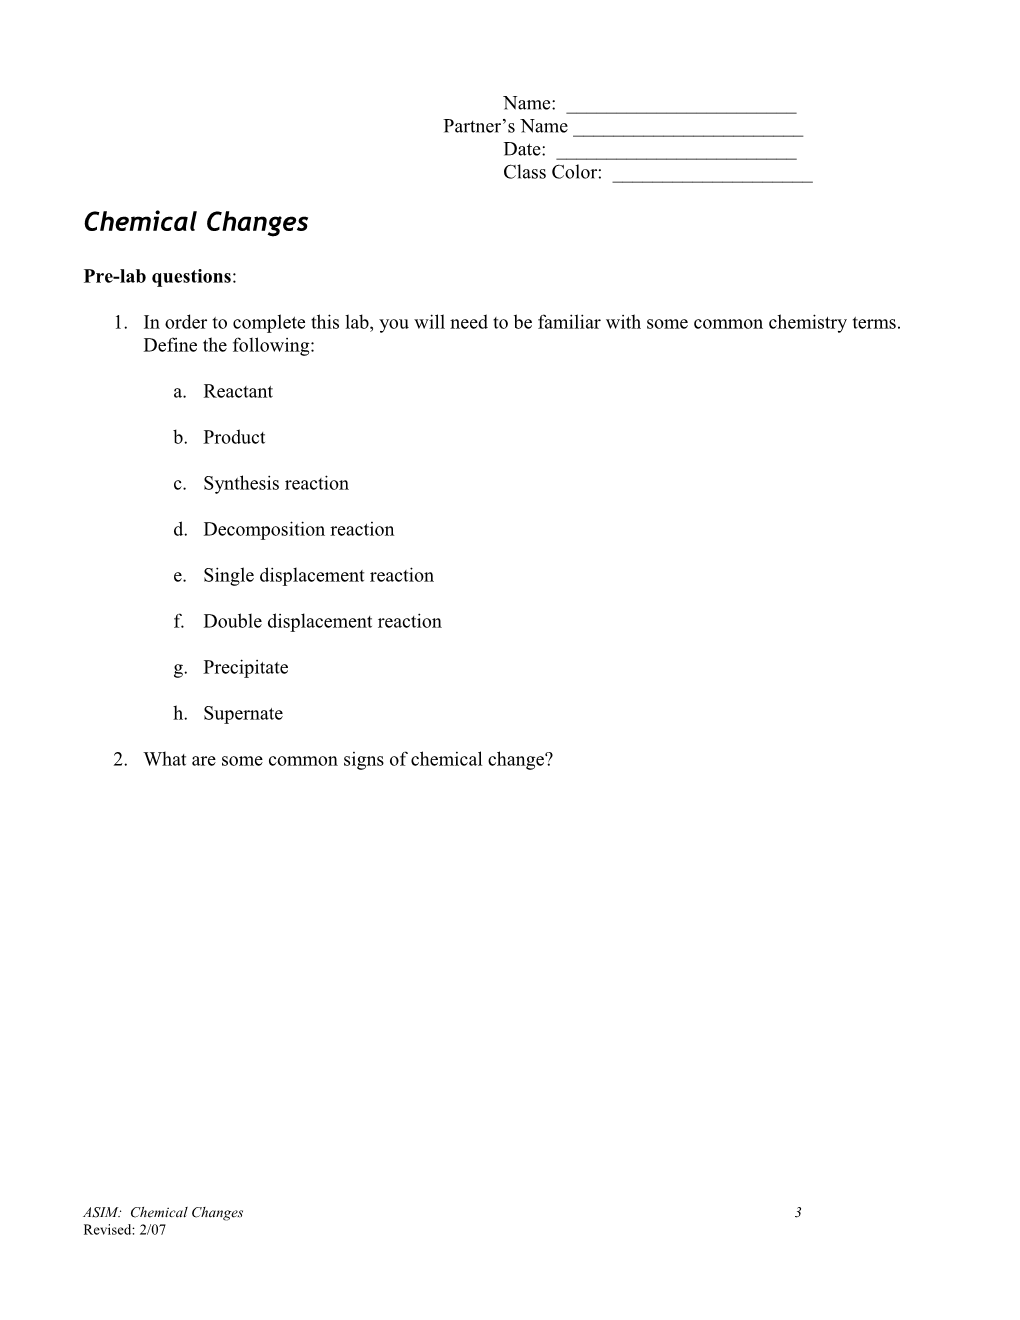 Evidence for Chemical Change